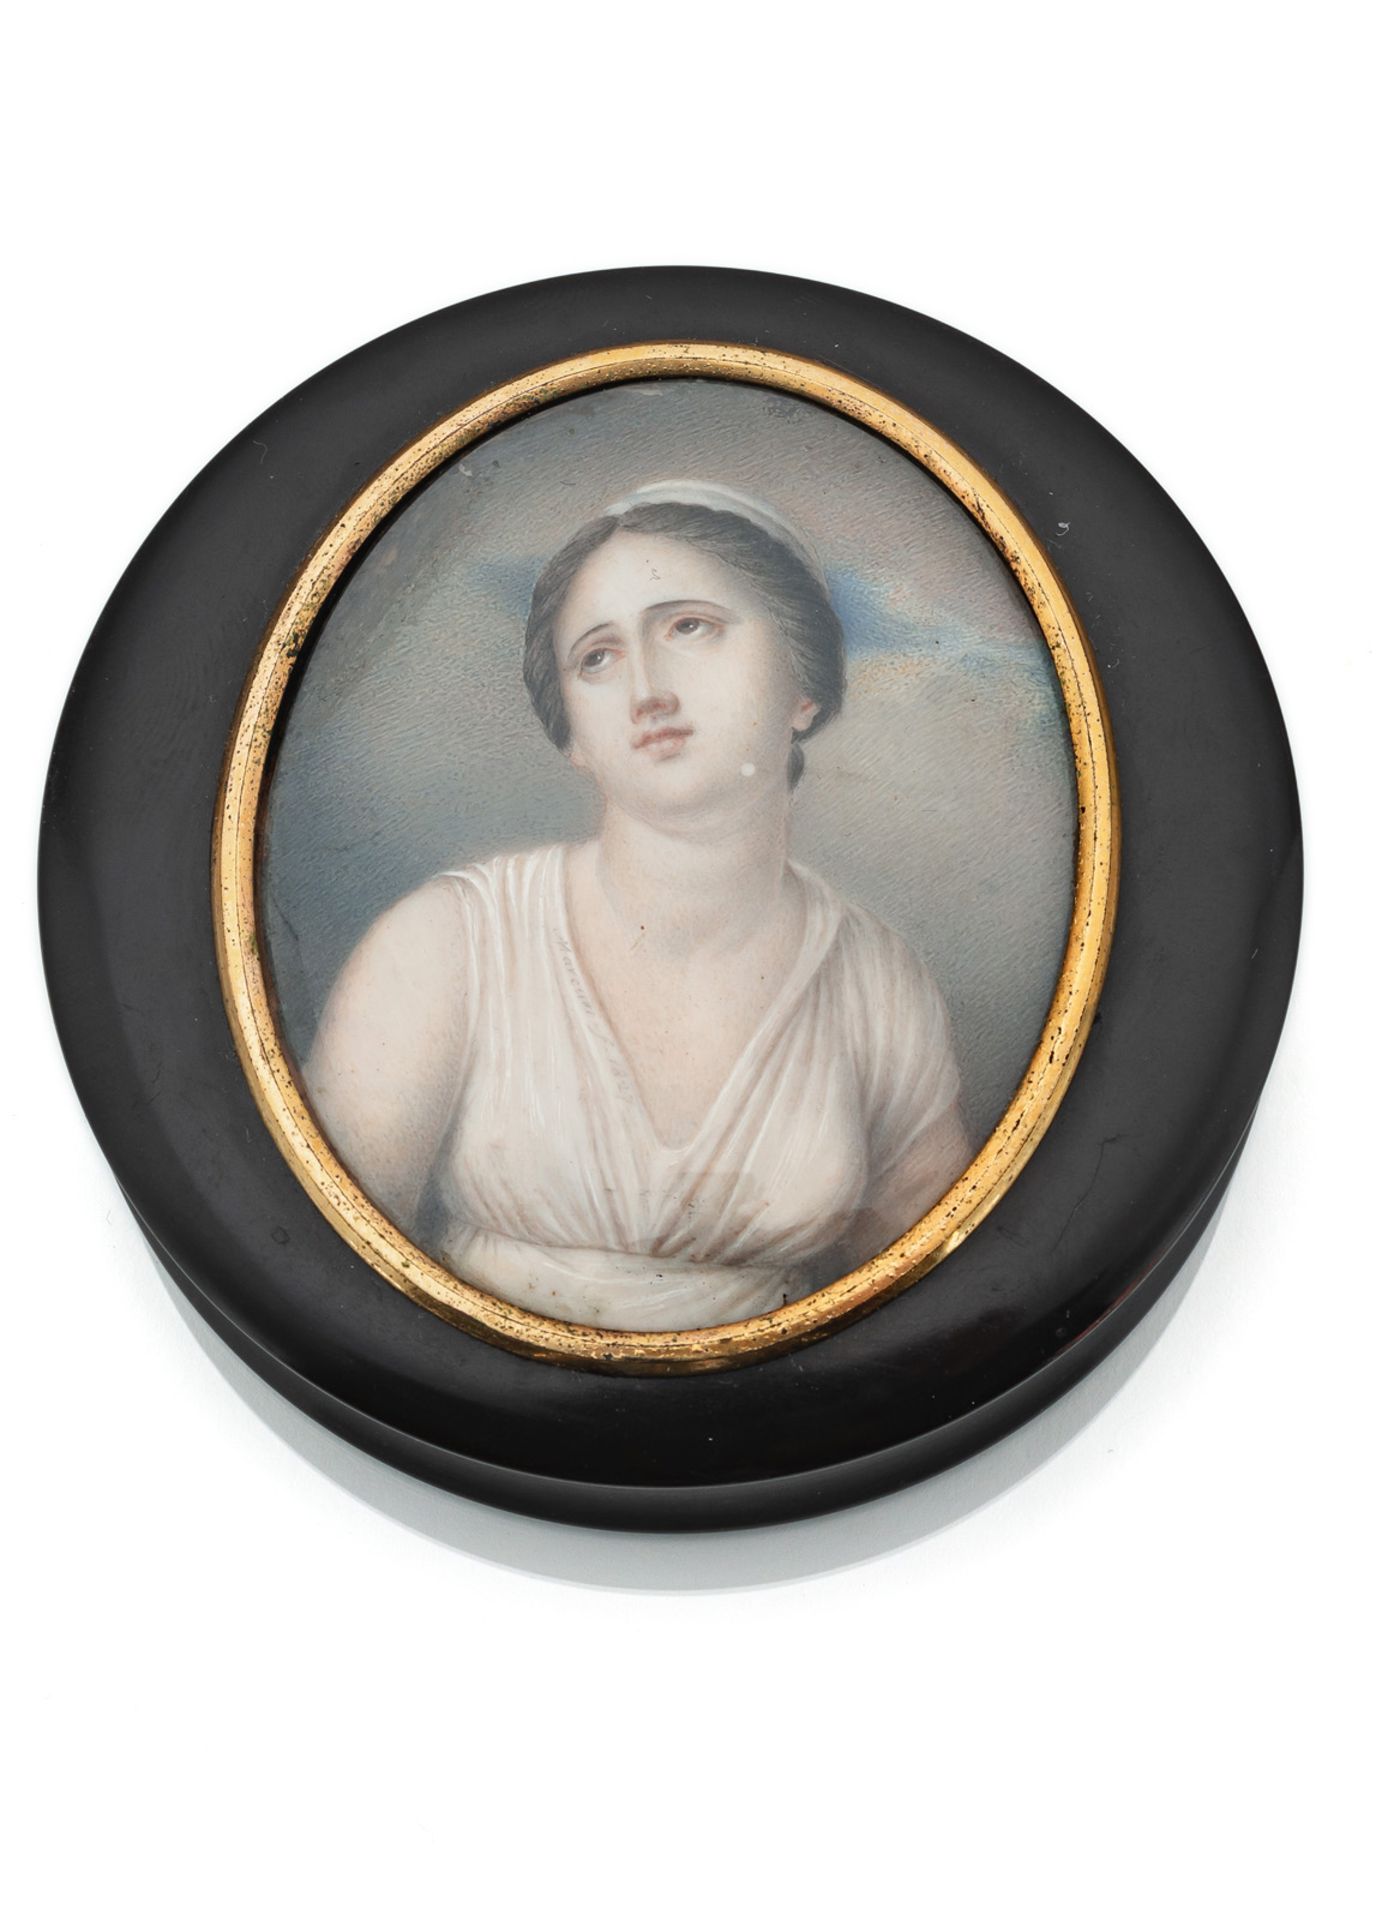 A TORTOISESHELL TABATIERE WITH A PORTAIT OF A YOUNG LADY